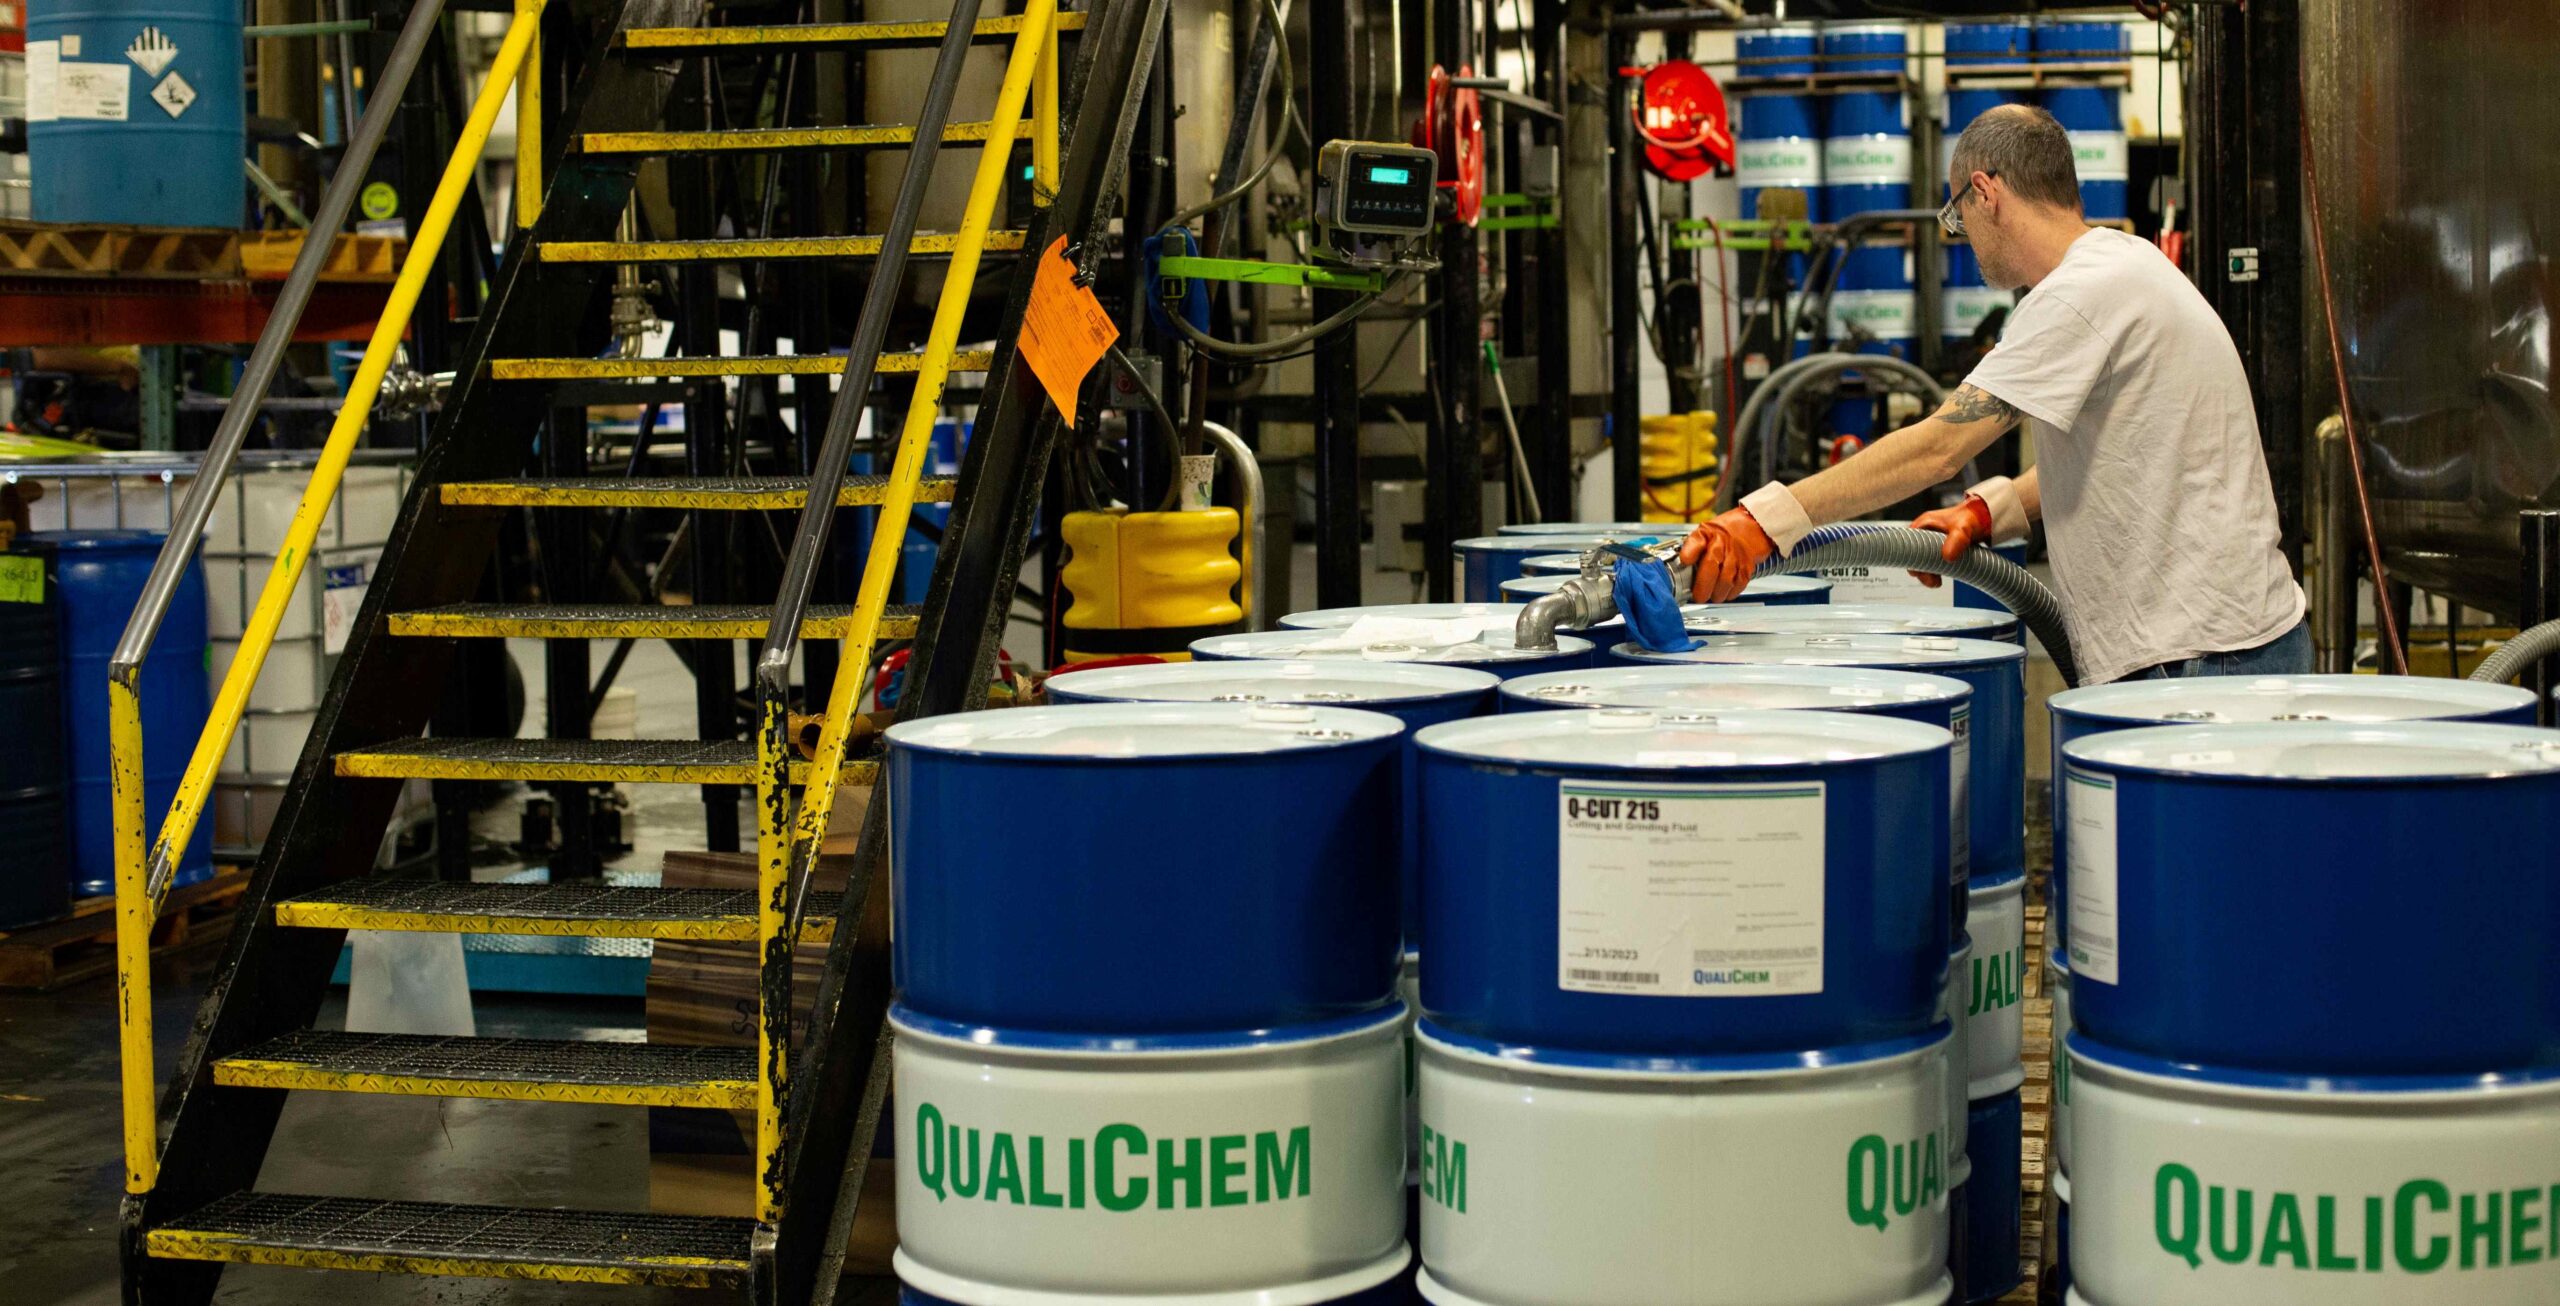 A worker in a warehouse is handling chemical drums labeled 